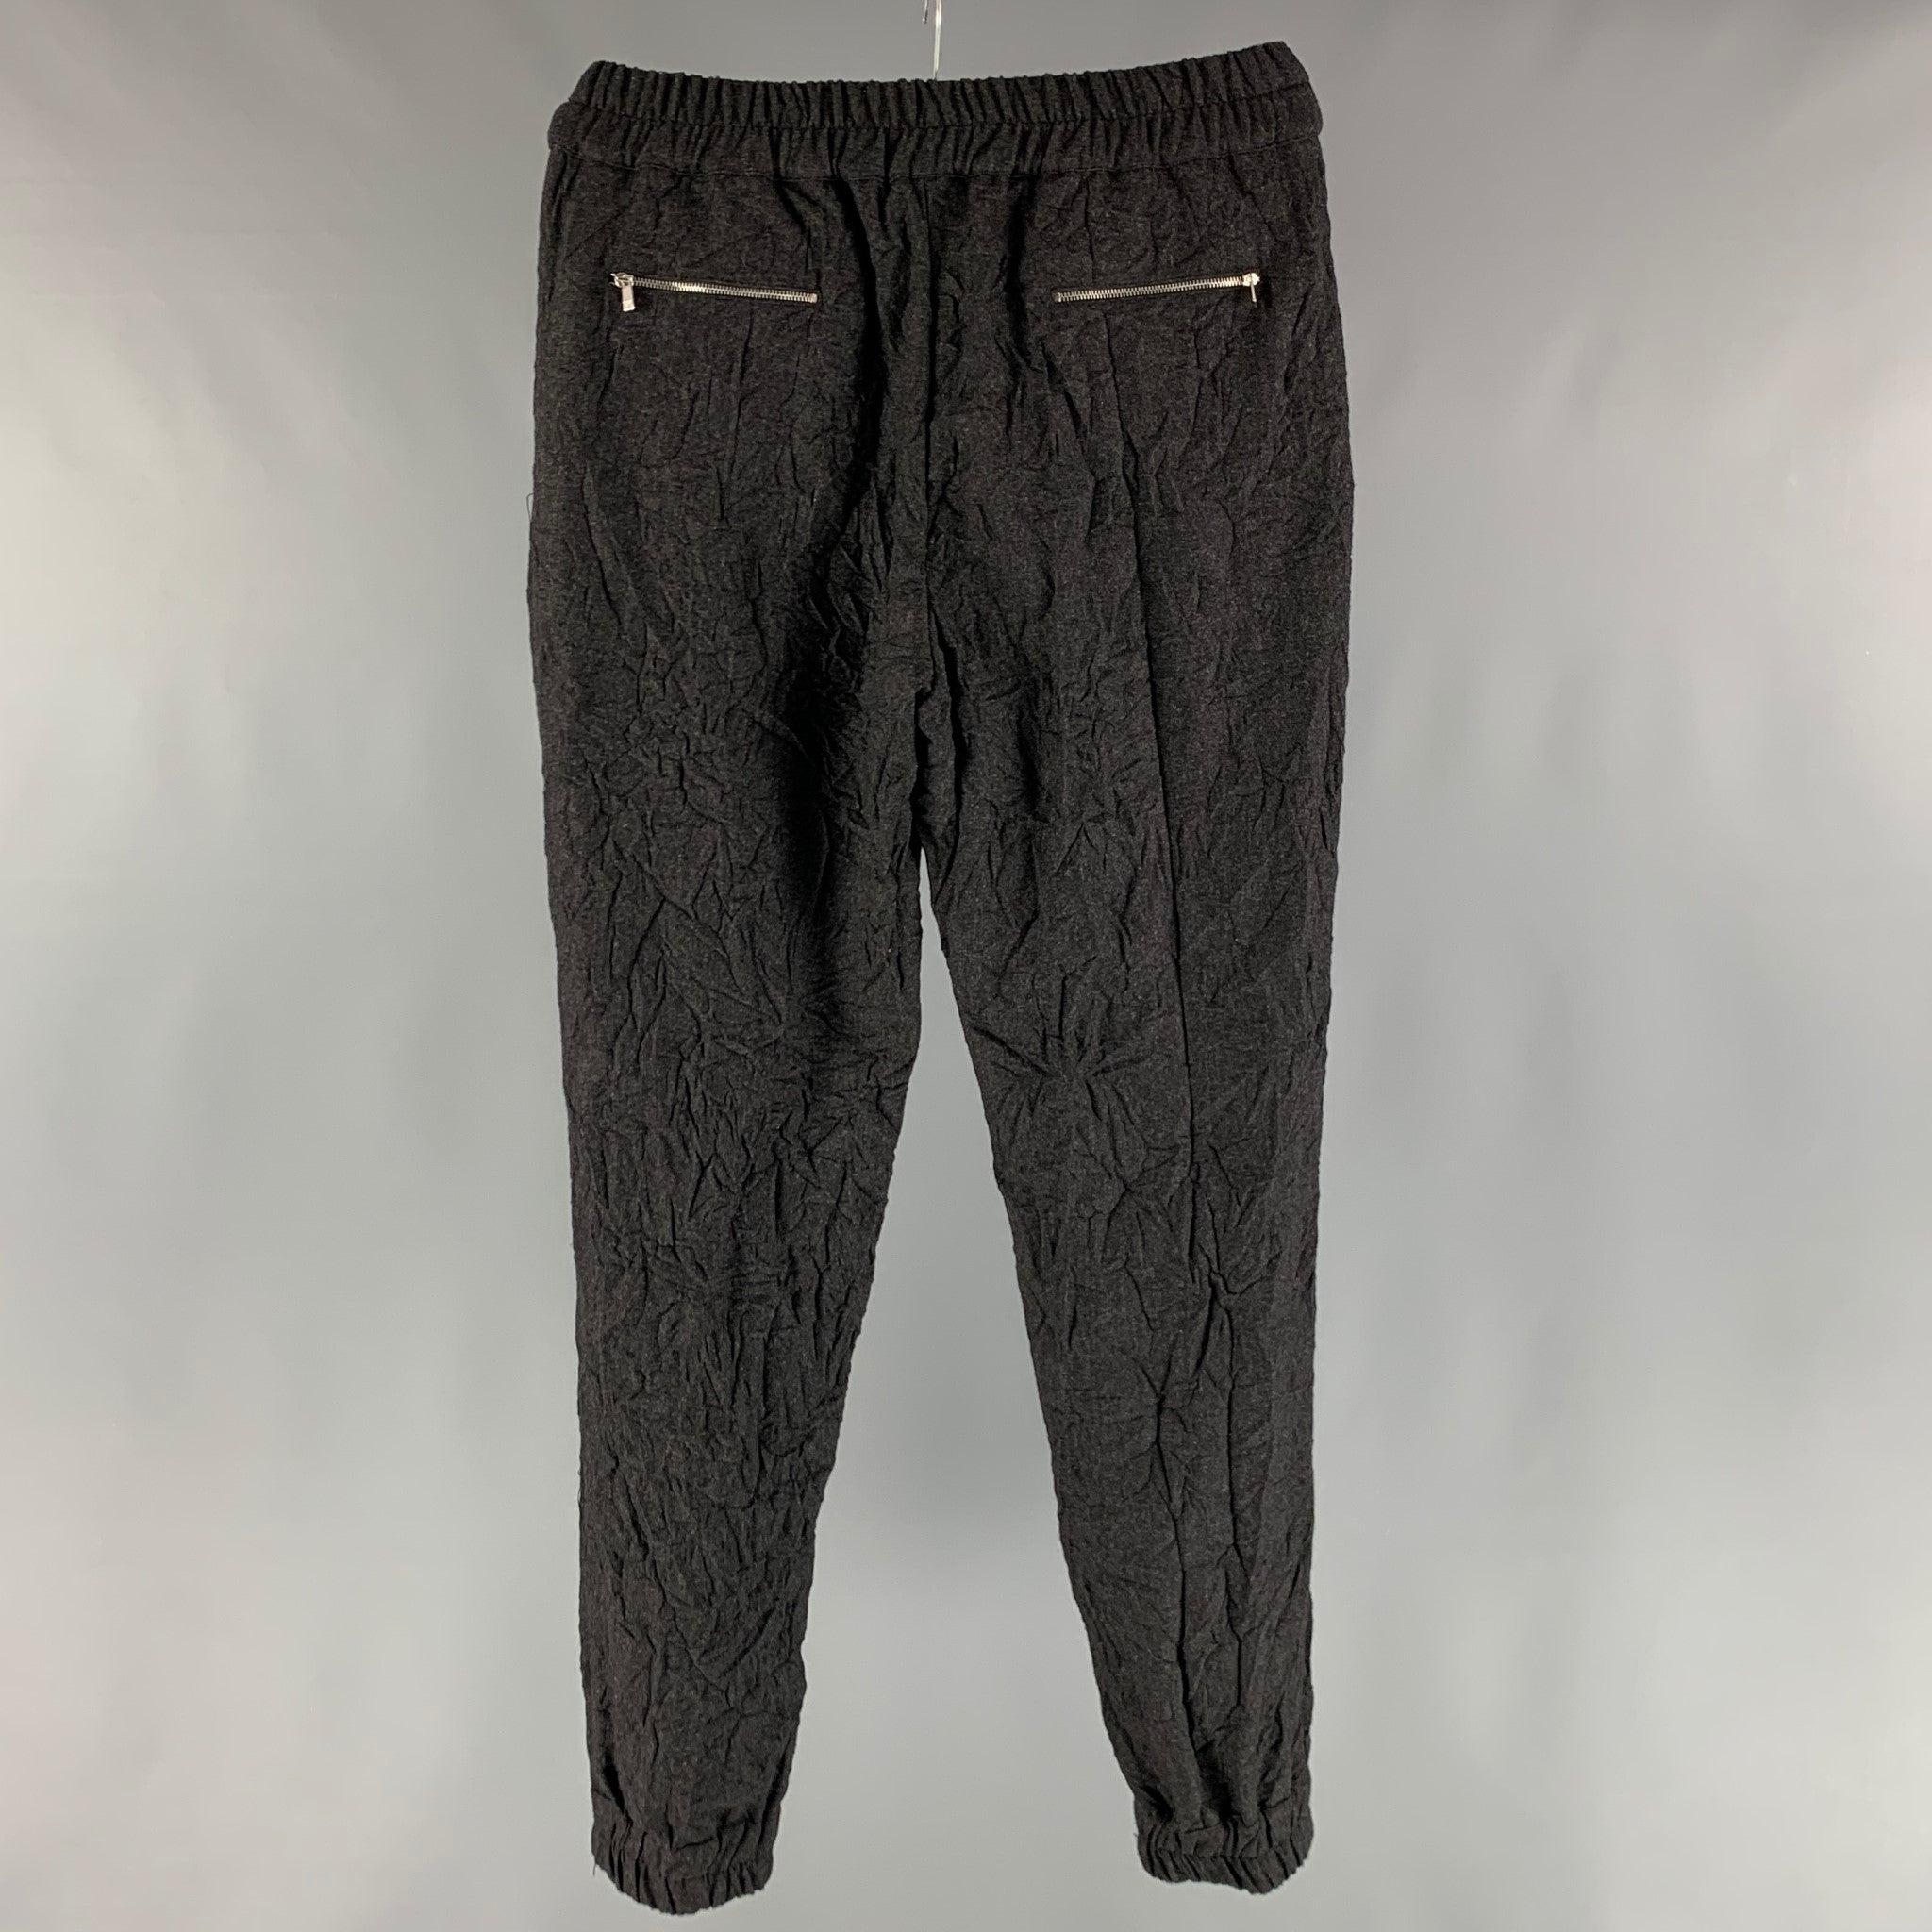 MICHAEL KORS sweatpants comes in a grey virgin wool woven material featuring wrinkle texture, zipper pockets, cuffed legs, and an elastic waistband. Excellent Pre-Owned Condition.  

Marked:   4 

Measurements: 
  Waist: 30 inches Rise: 10.5 inches